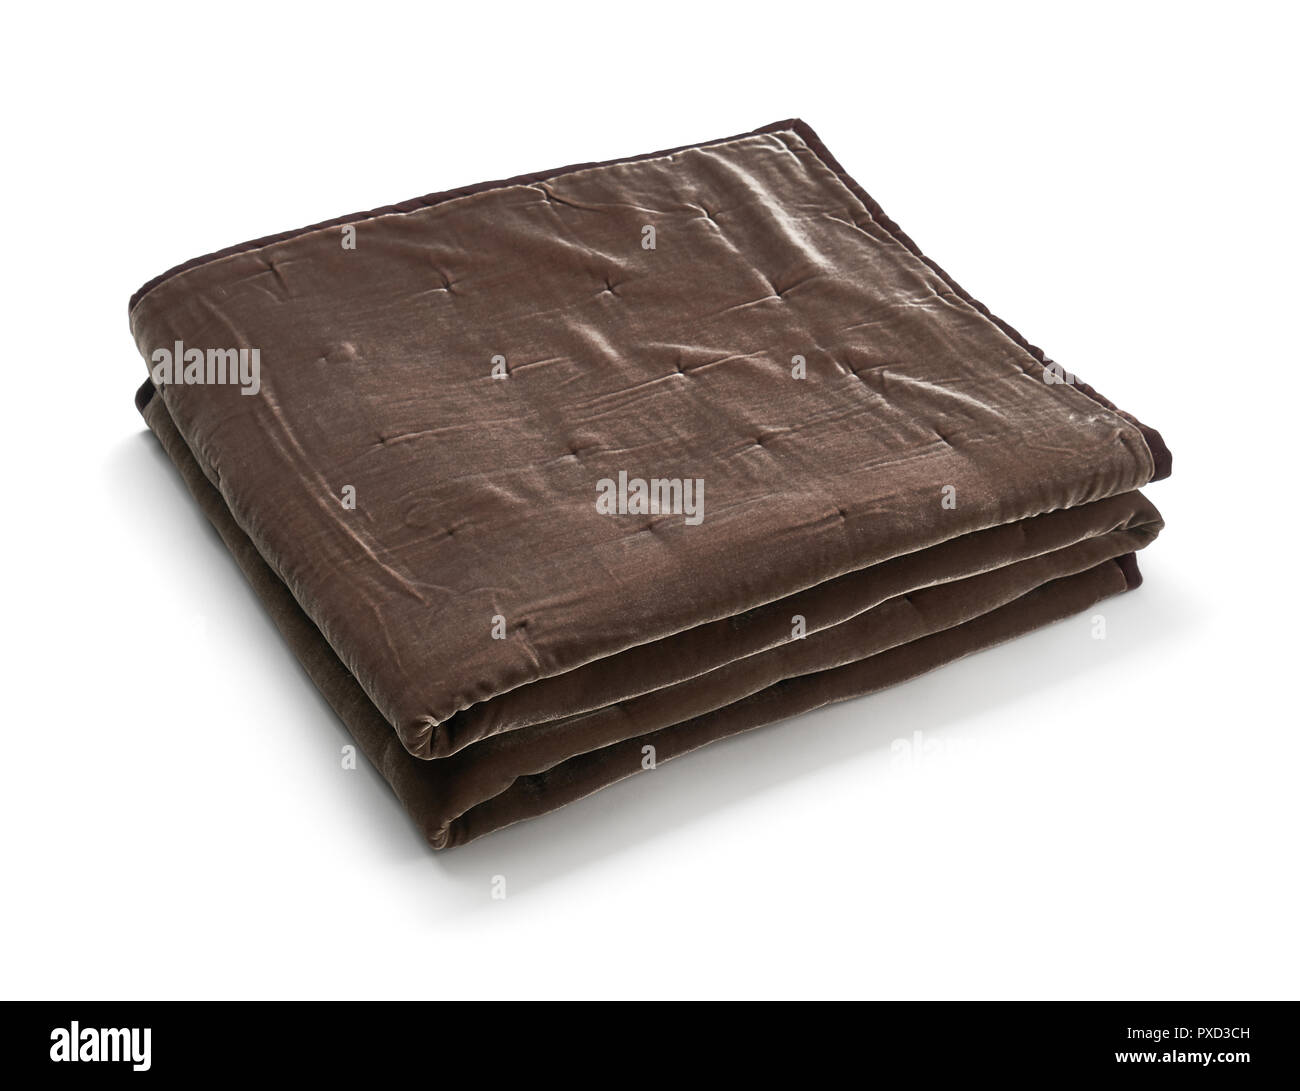 Brown blanket made of velor fabric, neatly folded, isolated on white background Stock Photo